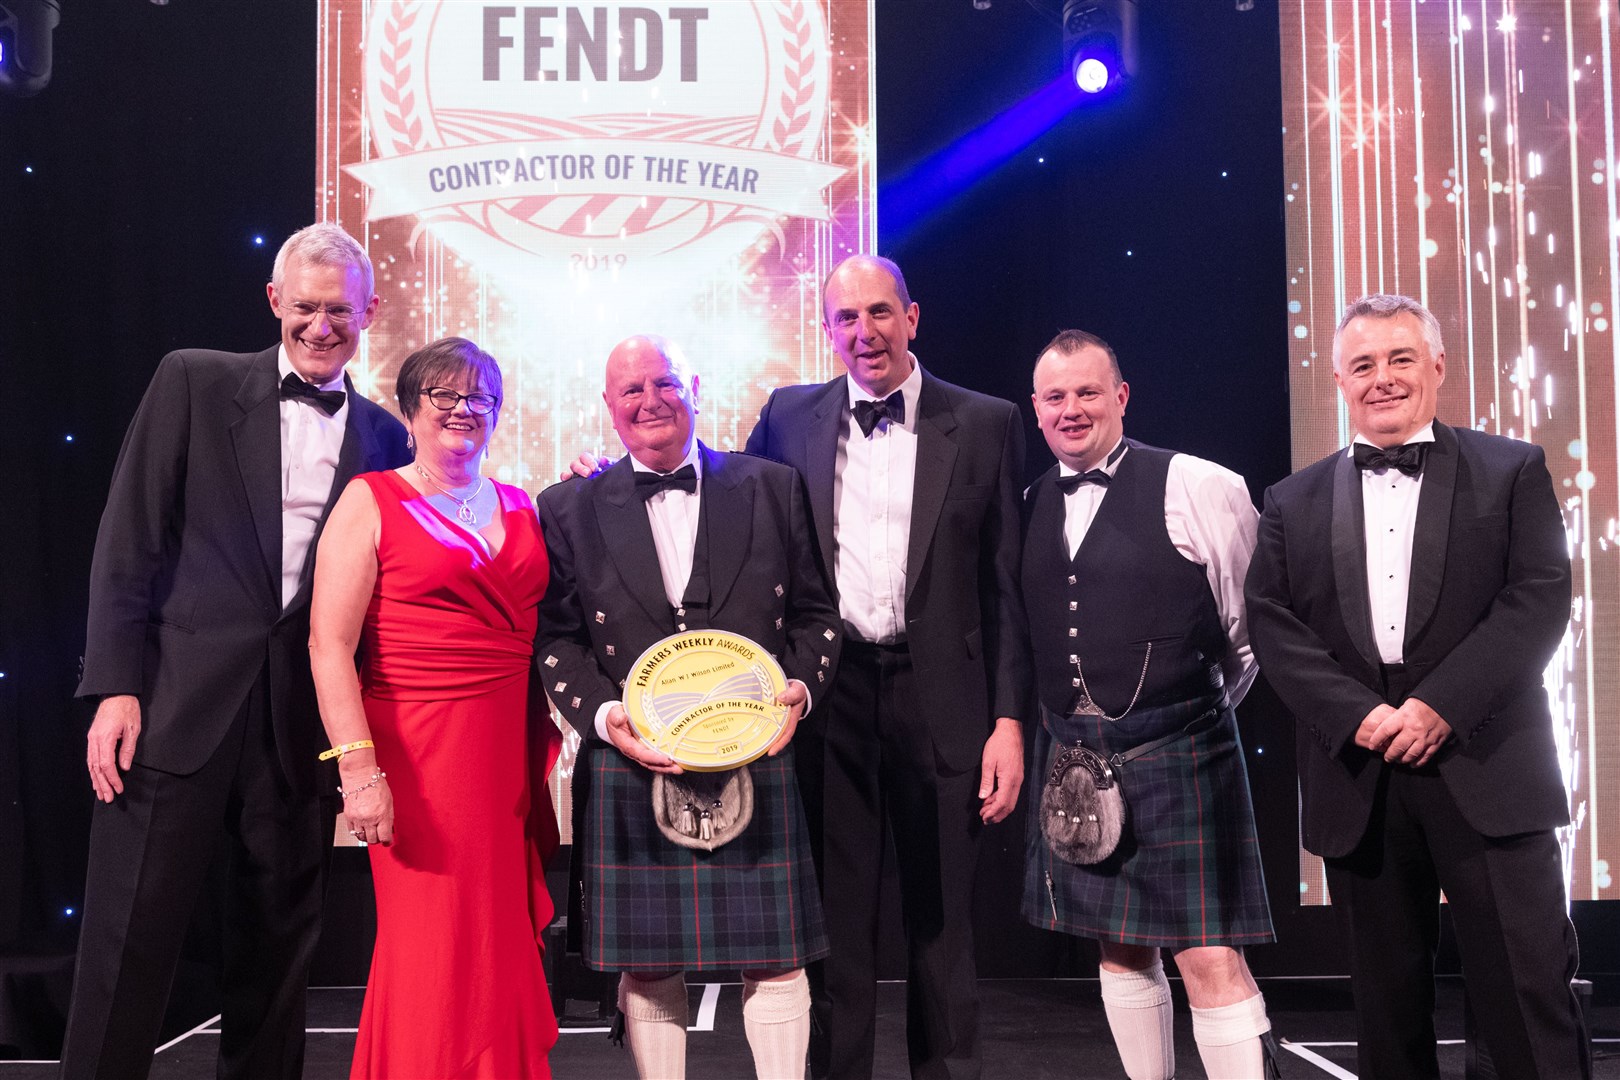 From left, Jeremy Vine presenter and broadcaster, Alyson Wilson, Allan Wilson,Martin Haymer from the sponsors Fendt, Stuart Wilson and Karl Schneider, editor of the Farmers Weekly.